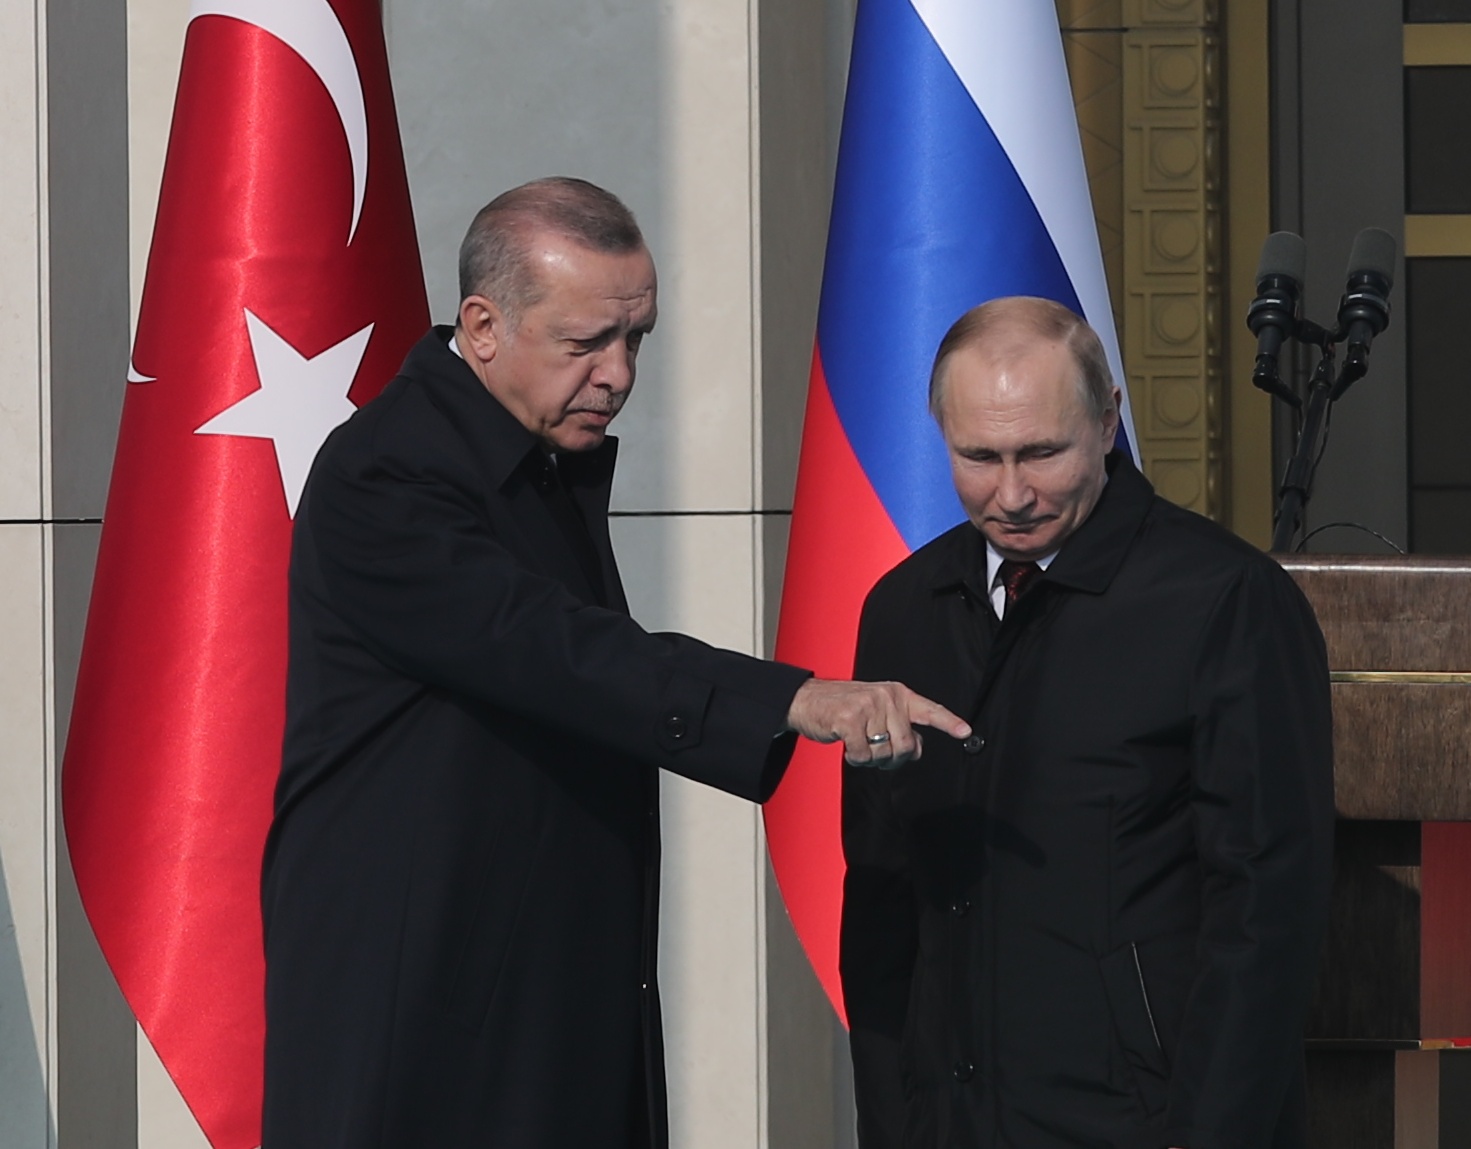 Turkish President Tayyip Erdogan and his Russian counterpart Vladimir Putin attend groundbreaking ceremony of the Akkuyu Nuclear Power Plant through videolink, at the Presidential Palace in Ankara, Turkey April 3, 2018. REUTERS/Umit Bektas